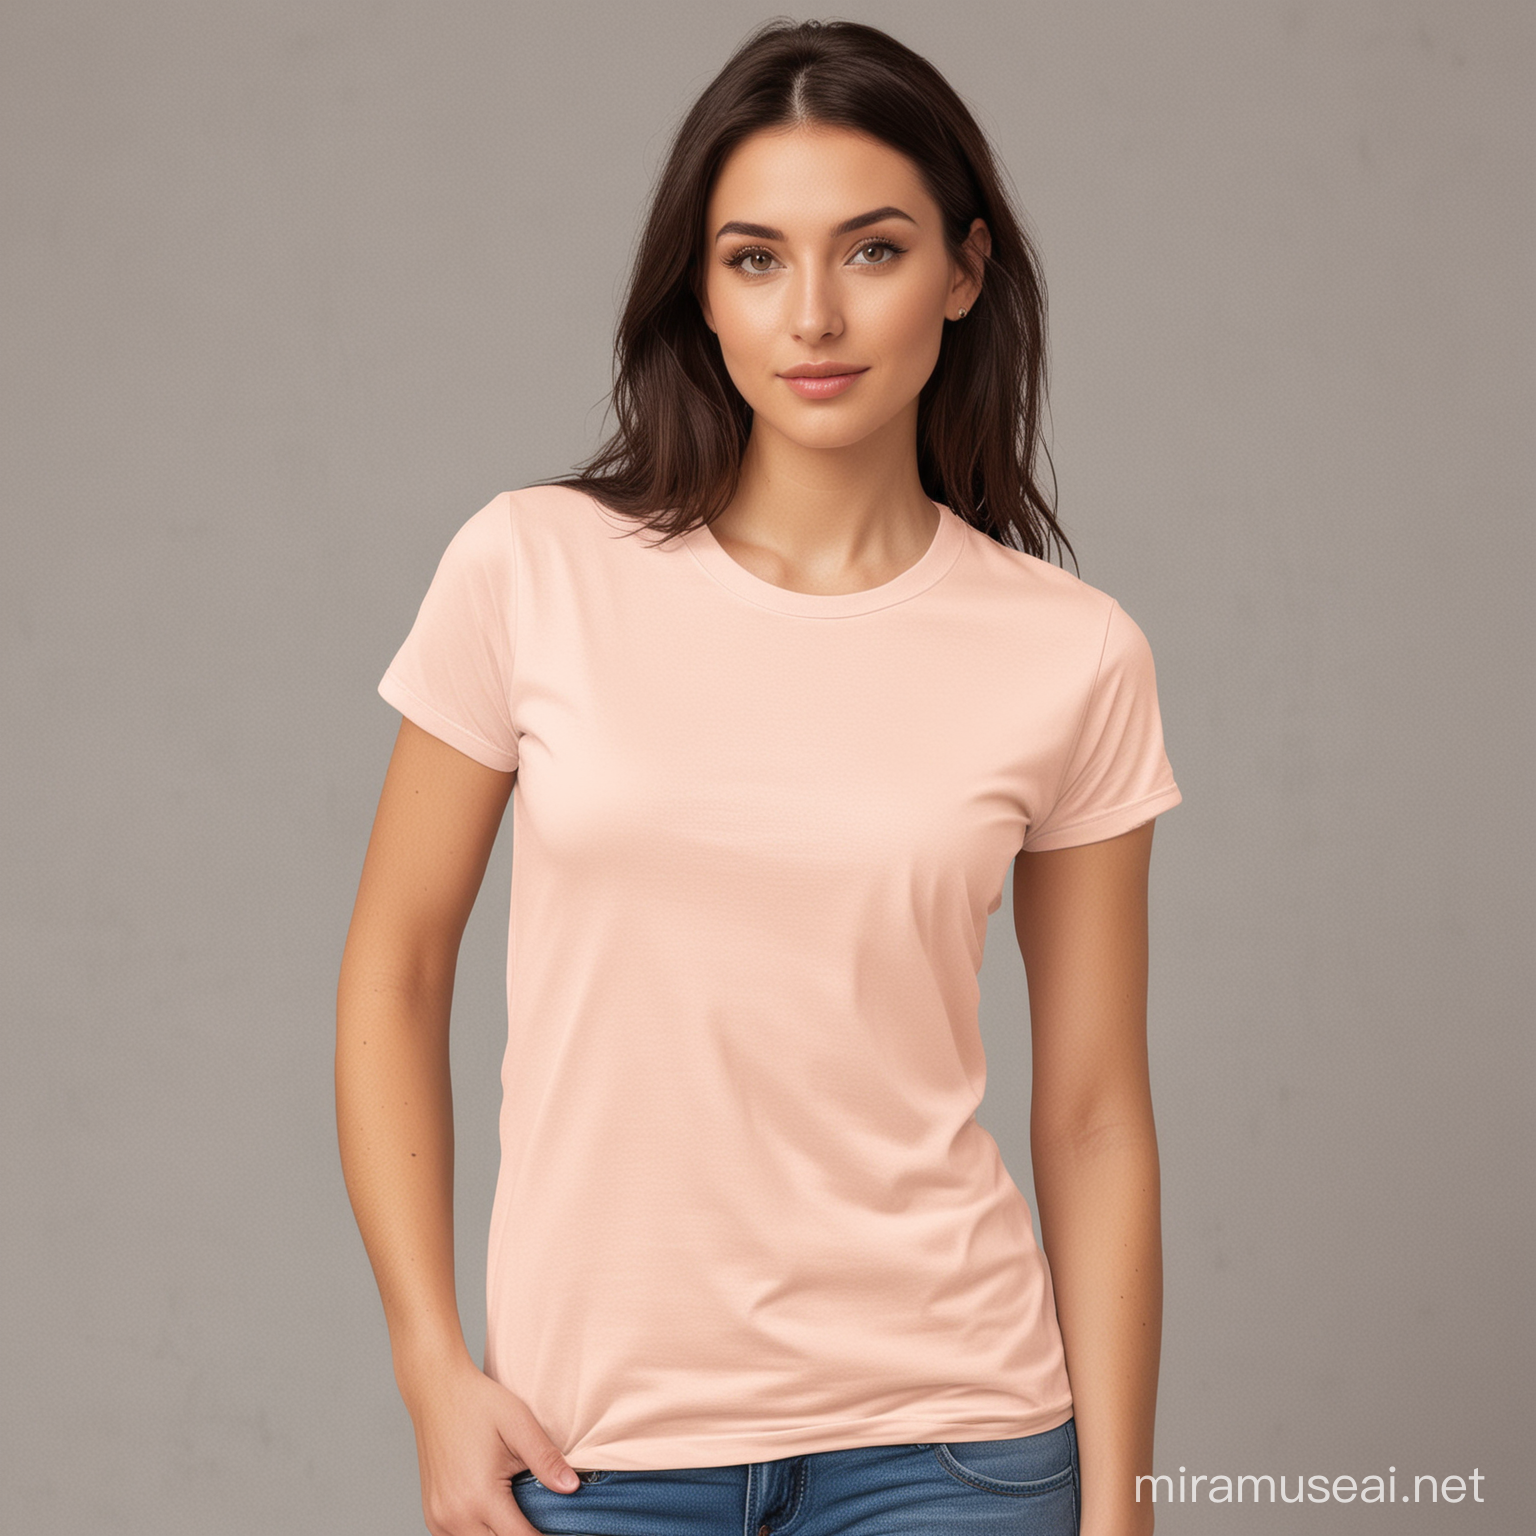 bella + canvas 3001 mockup in Peach with blank tshirt dressed on a woman